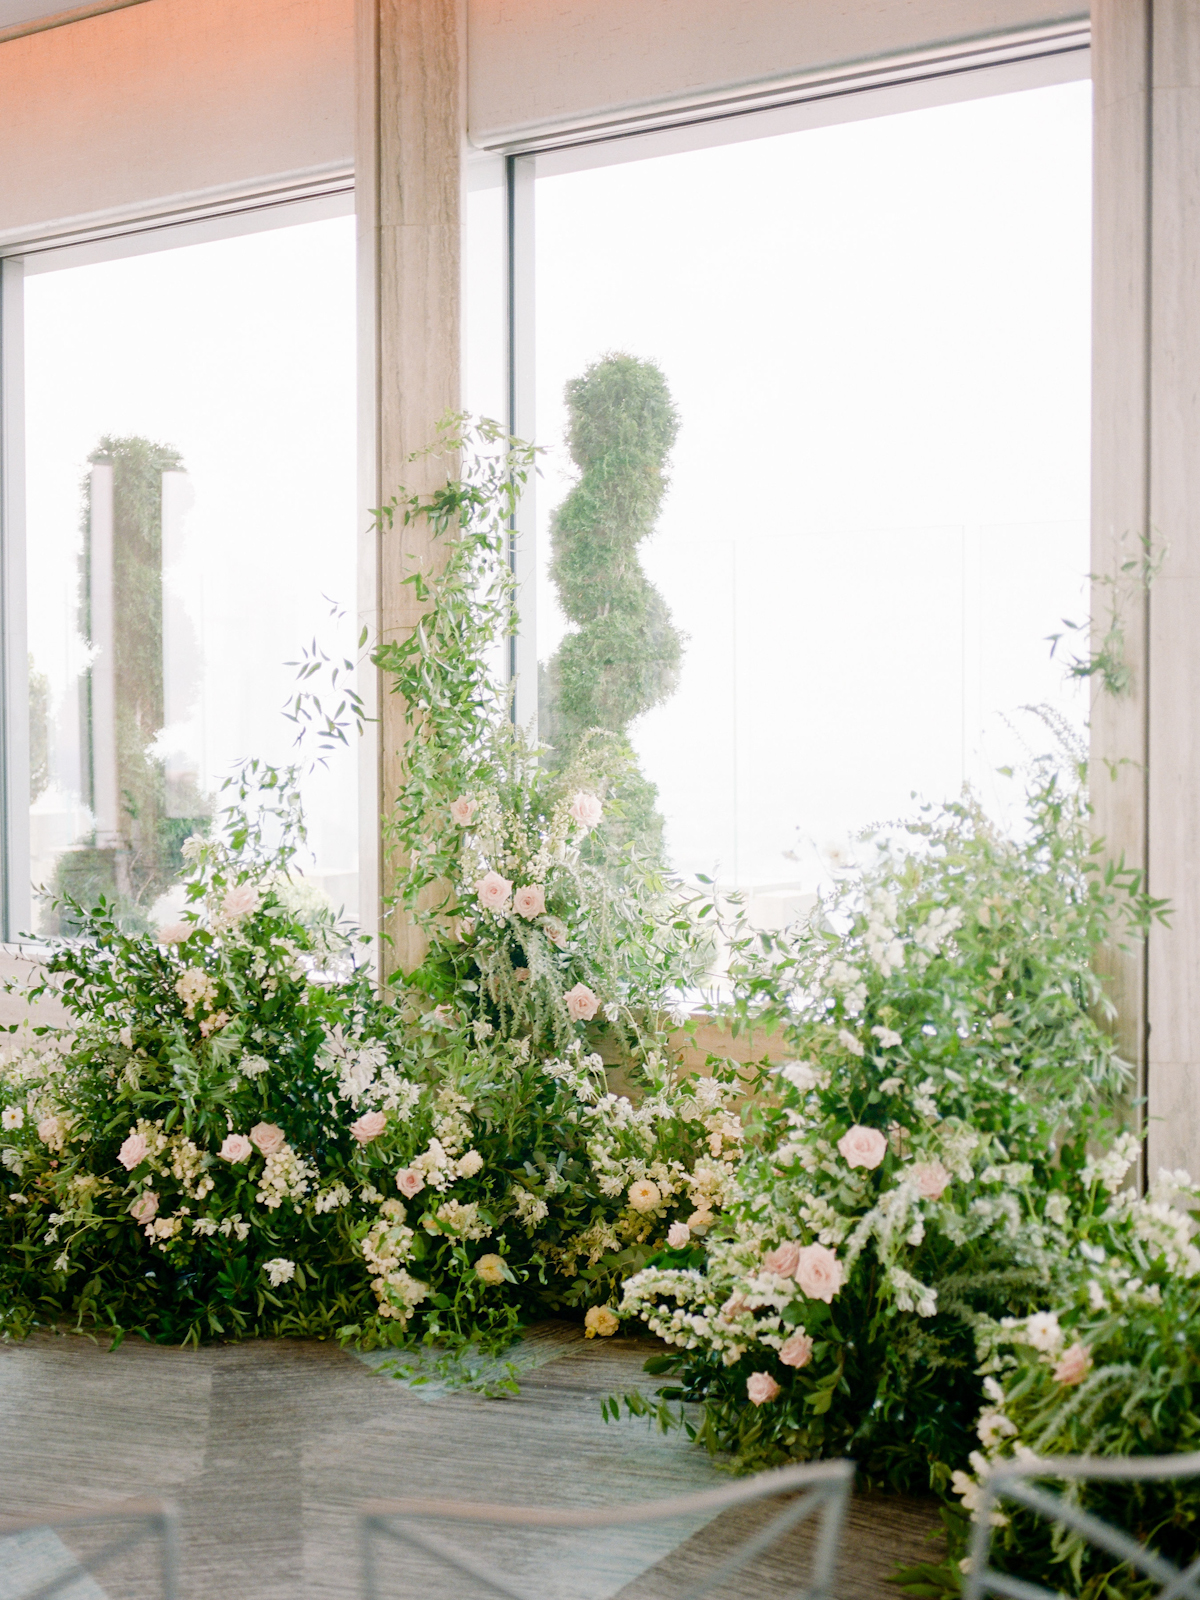 Rainbow Room wedding ceremony with flowers growing up from the ground